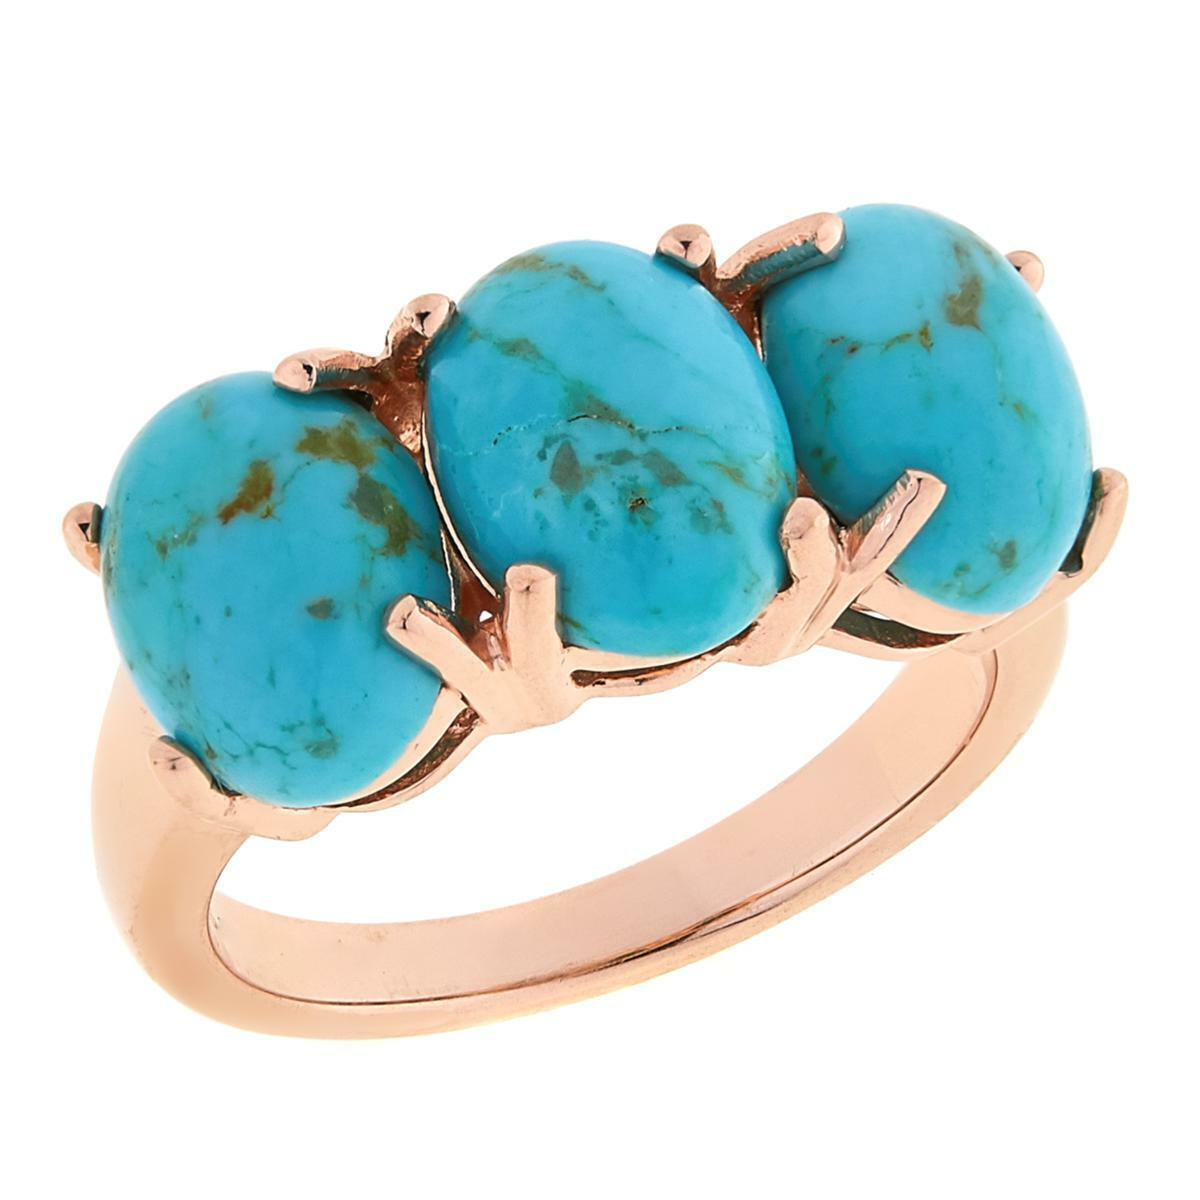 Paul Deasy Gem Rose Gold Plated 3-Stone Kingman Turquoise Ring Size 5 Hsn $101